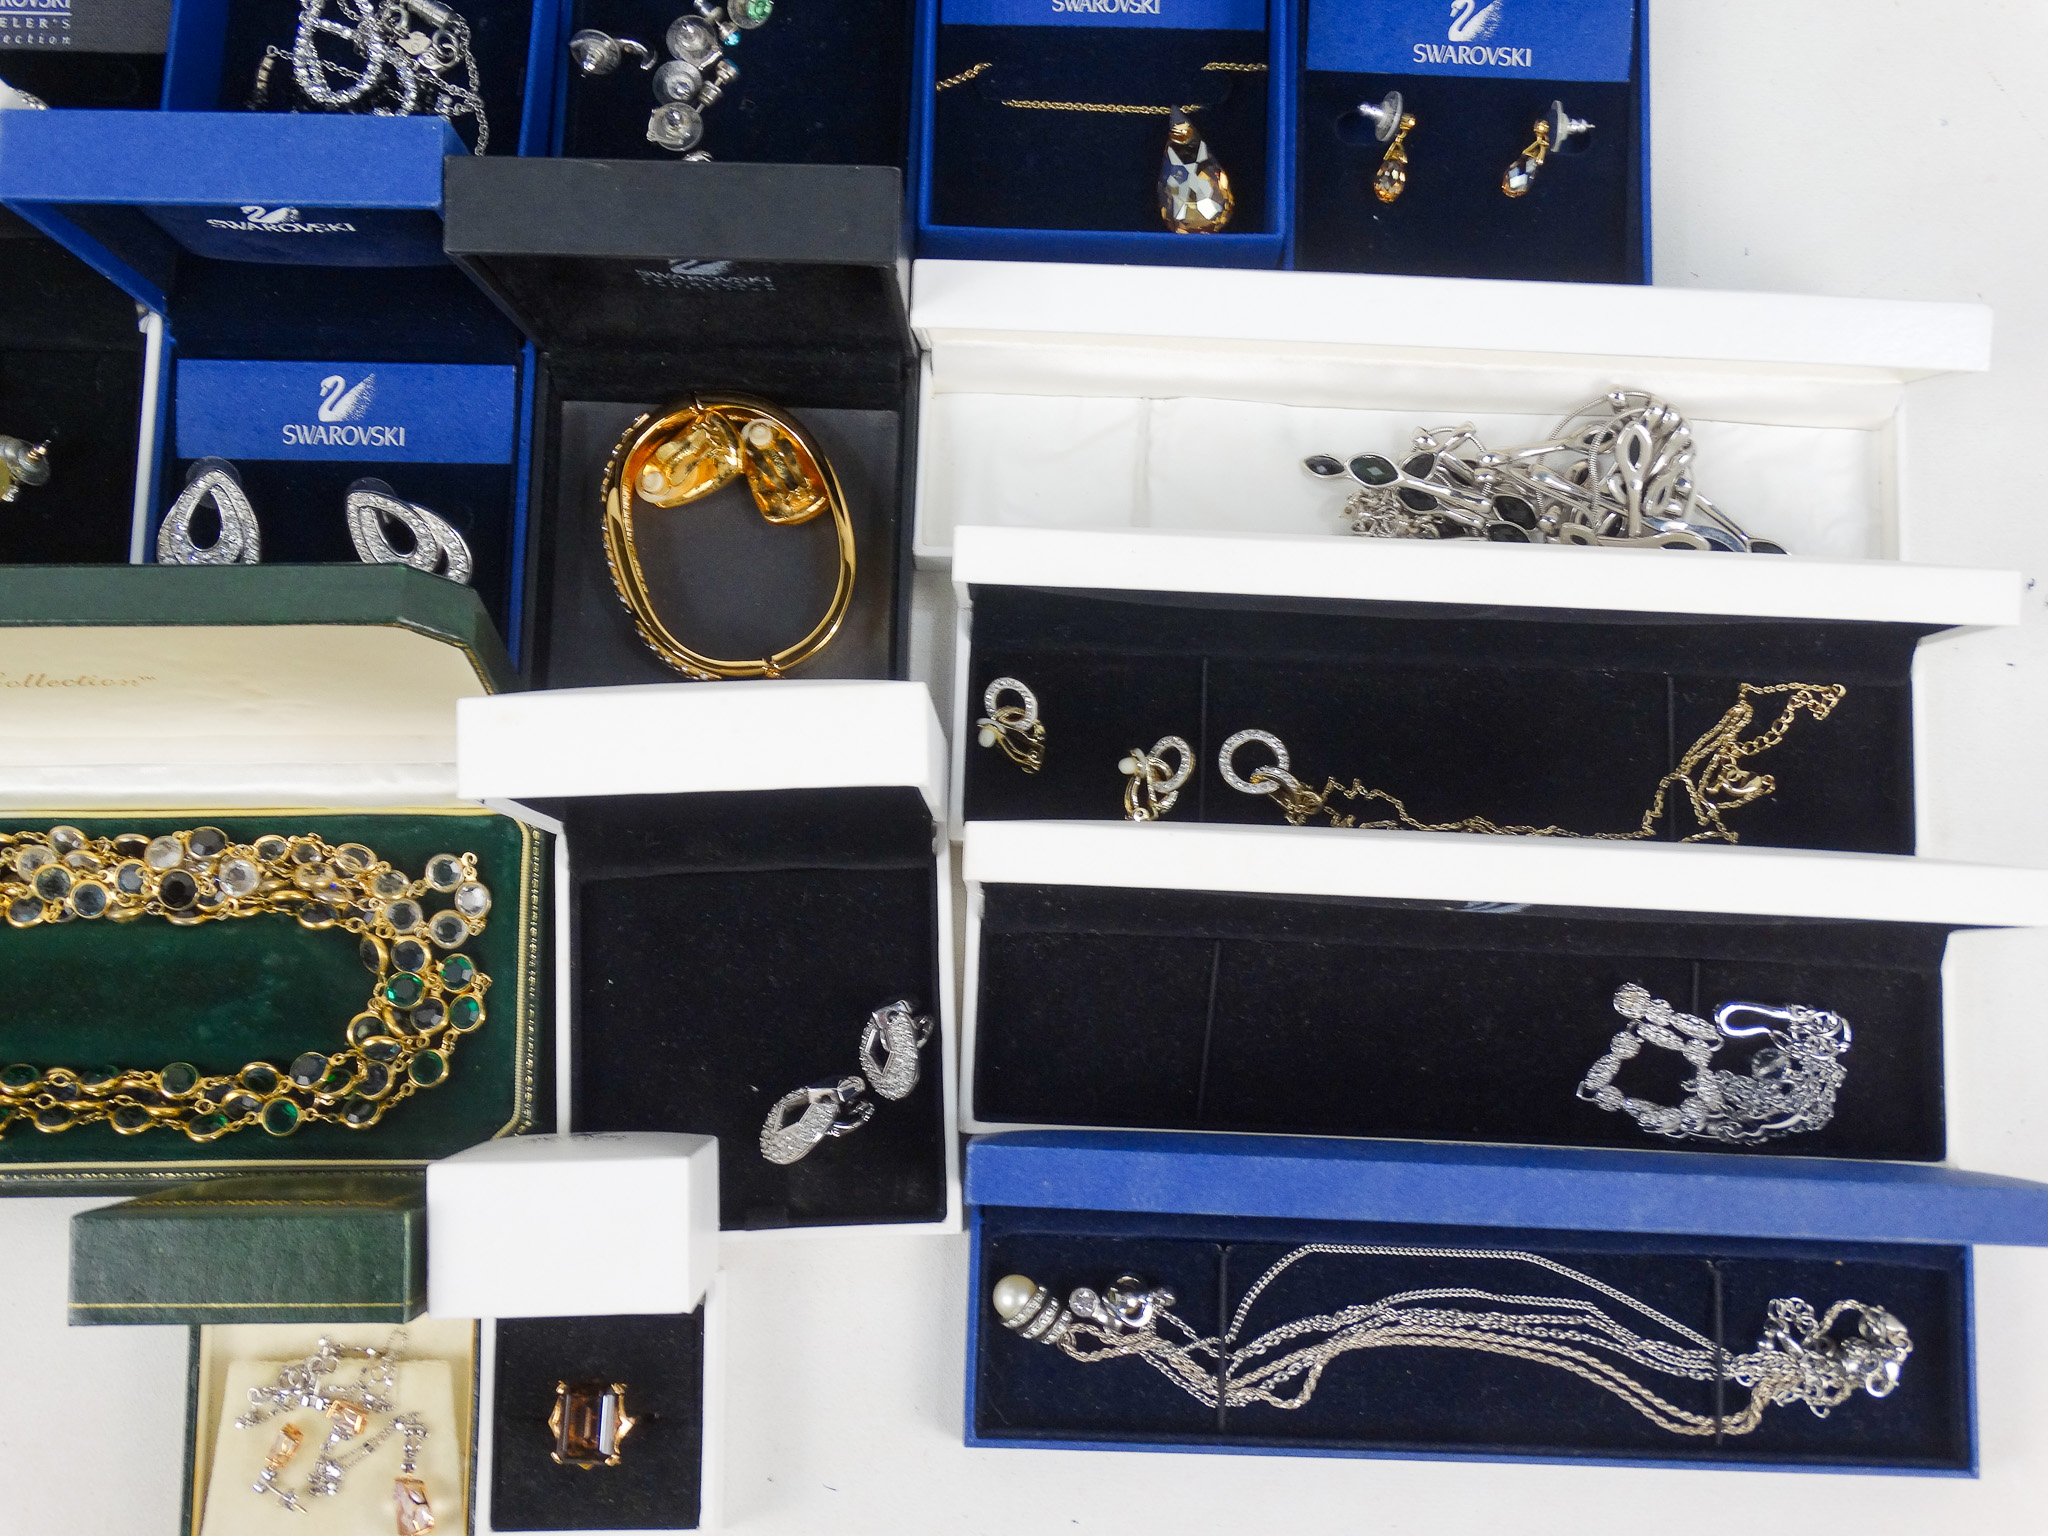 A quantity of Swarovski costume jewellery - many items with original retail boxes - Image 5 of 6